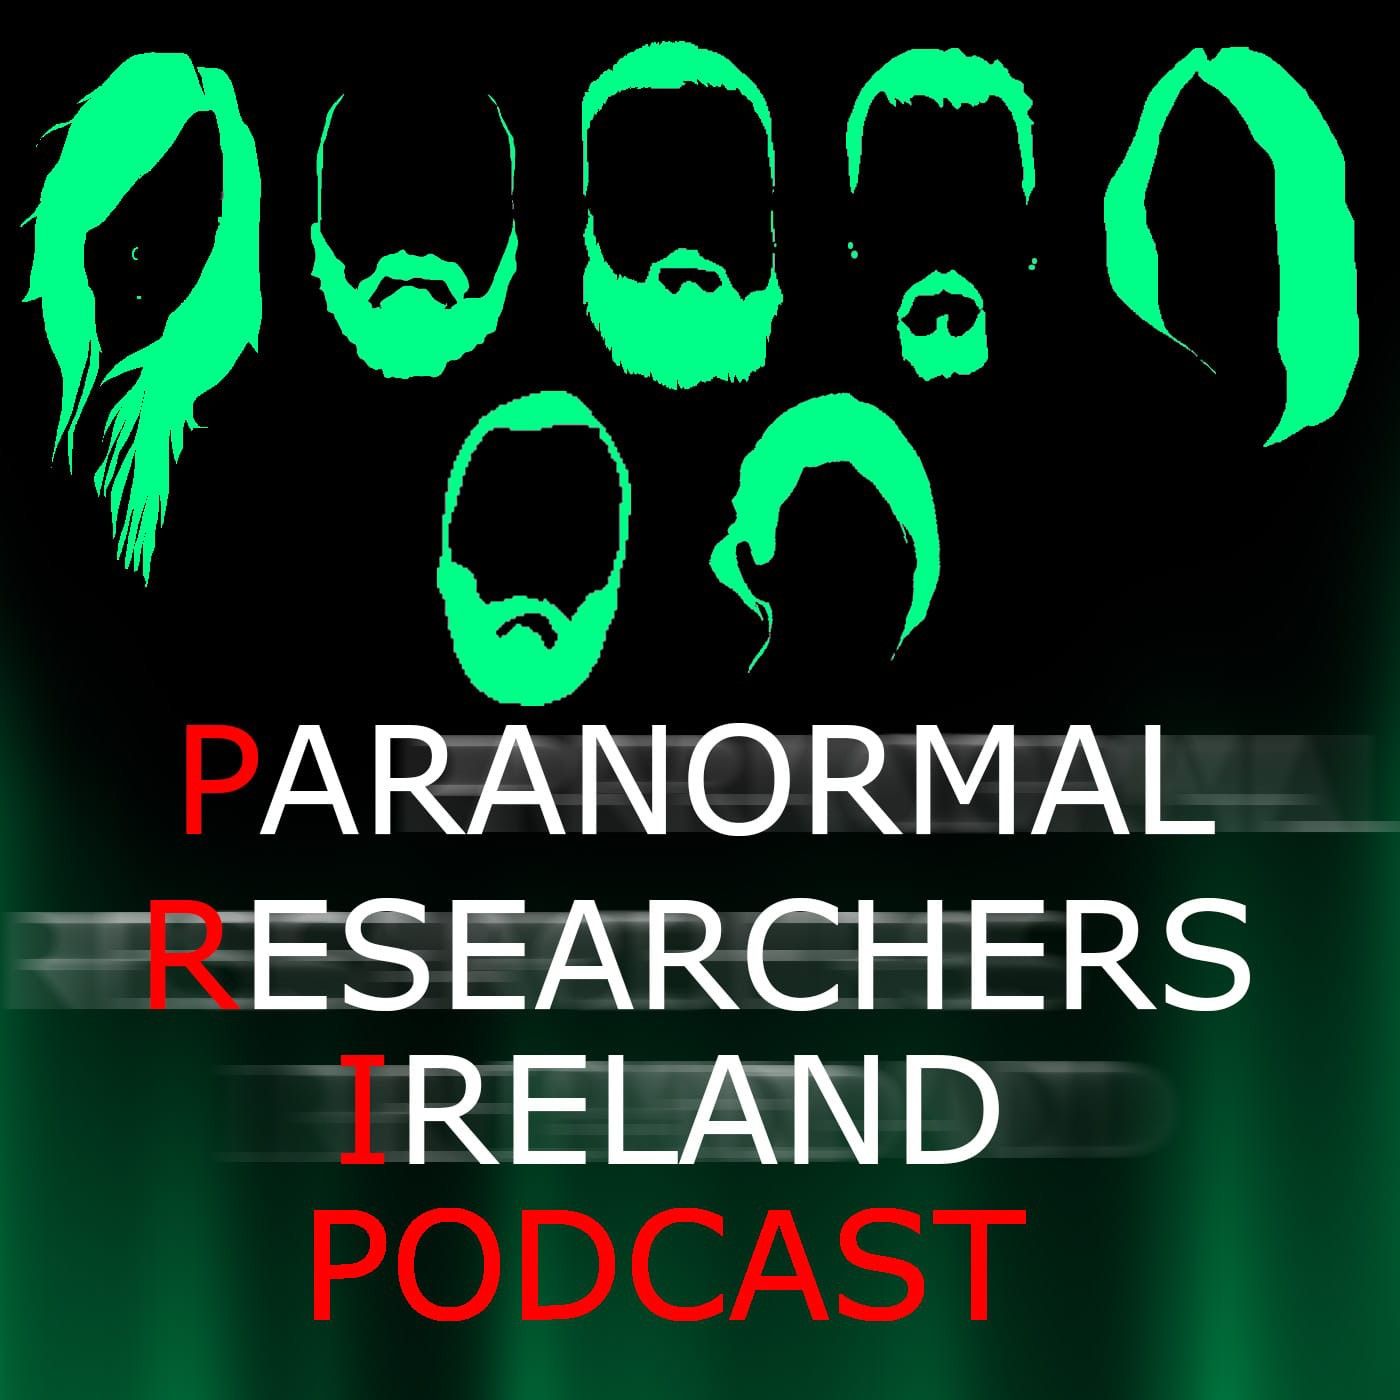 Paranormal Researchers Ireland's podcast